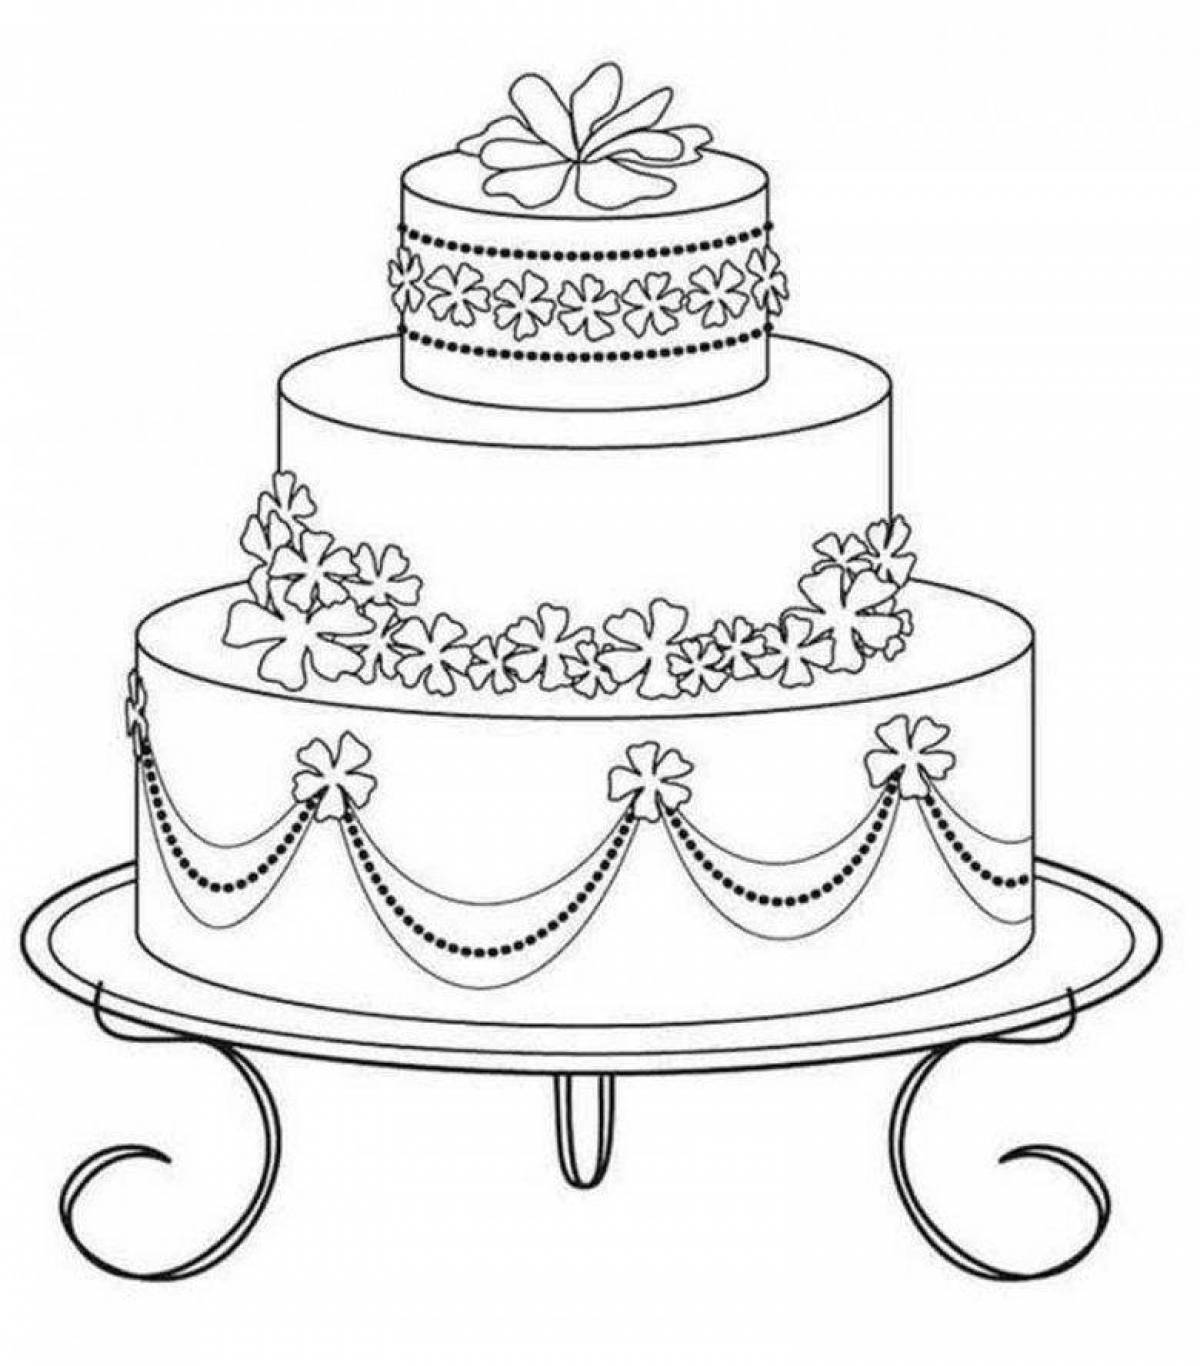 Colourful birthday cake coloring page